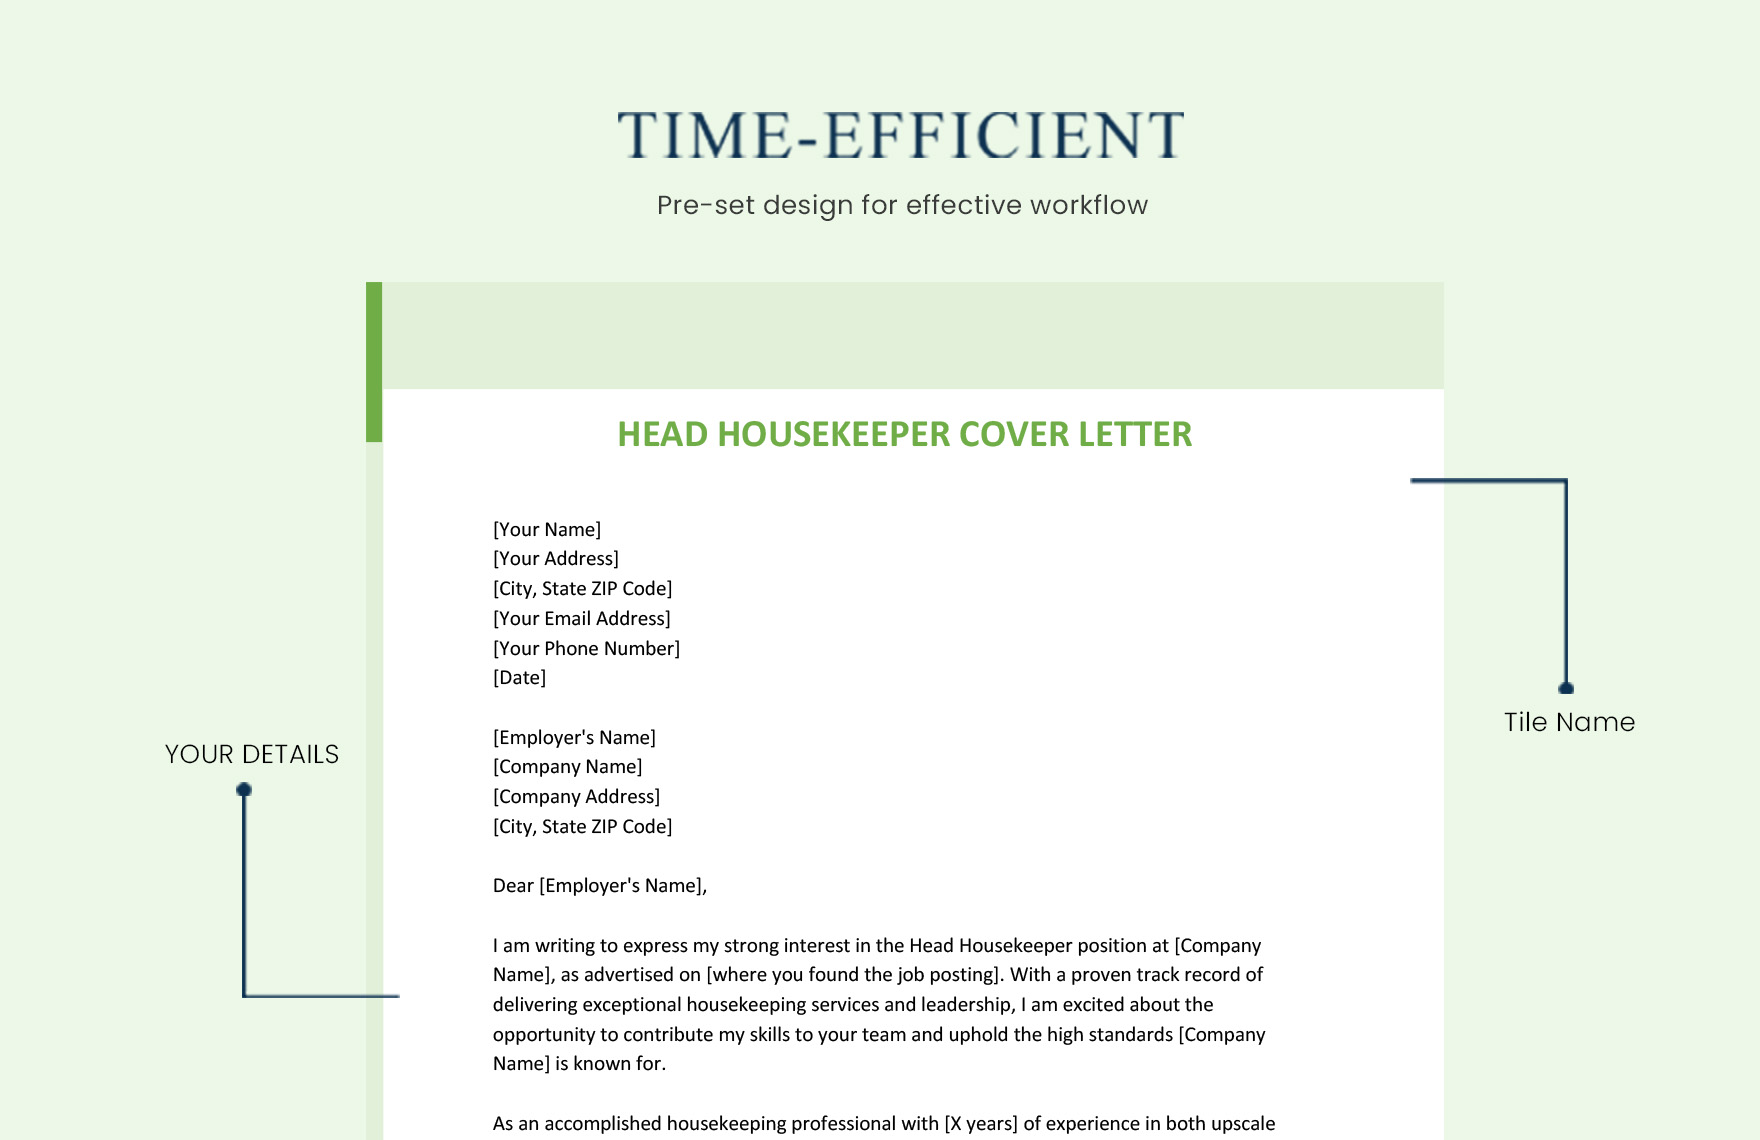 Head Housekeeper Cover Letter